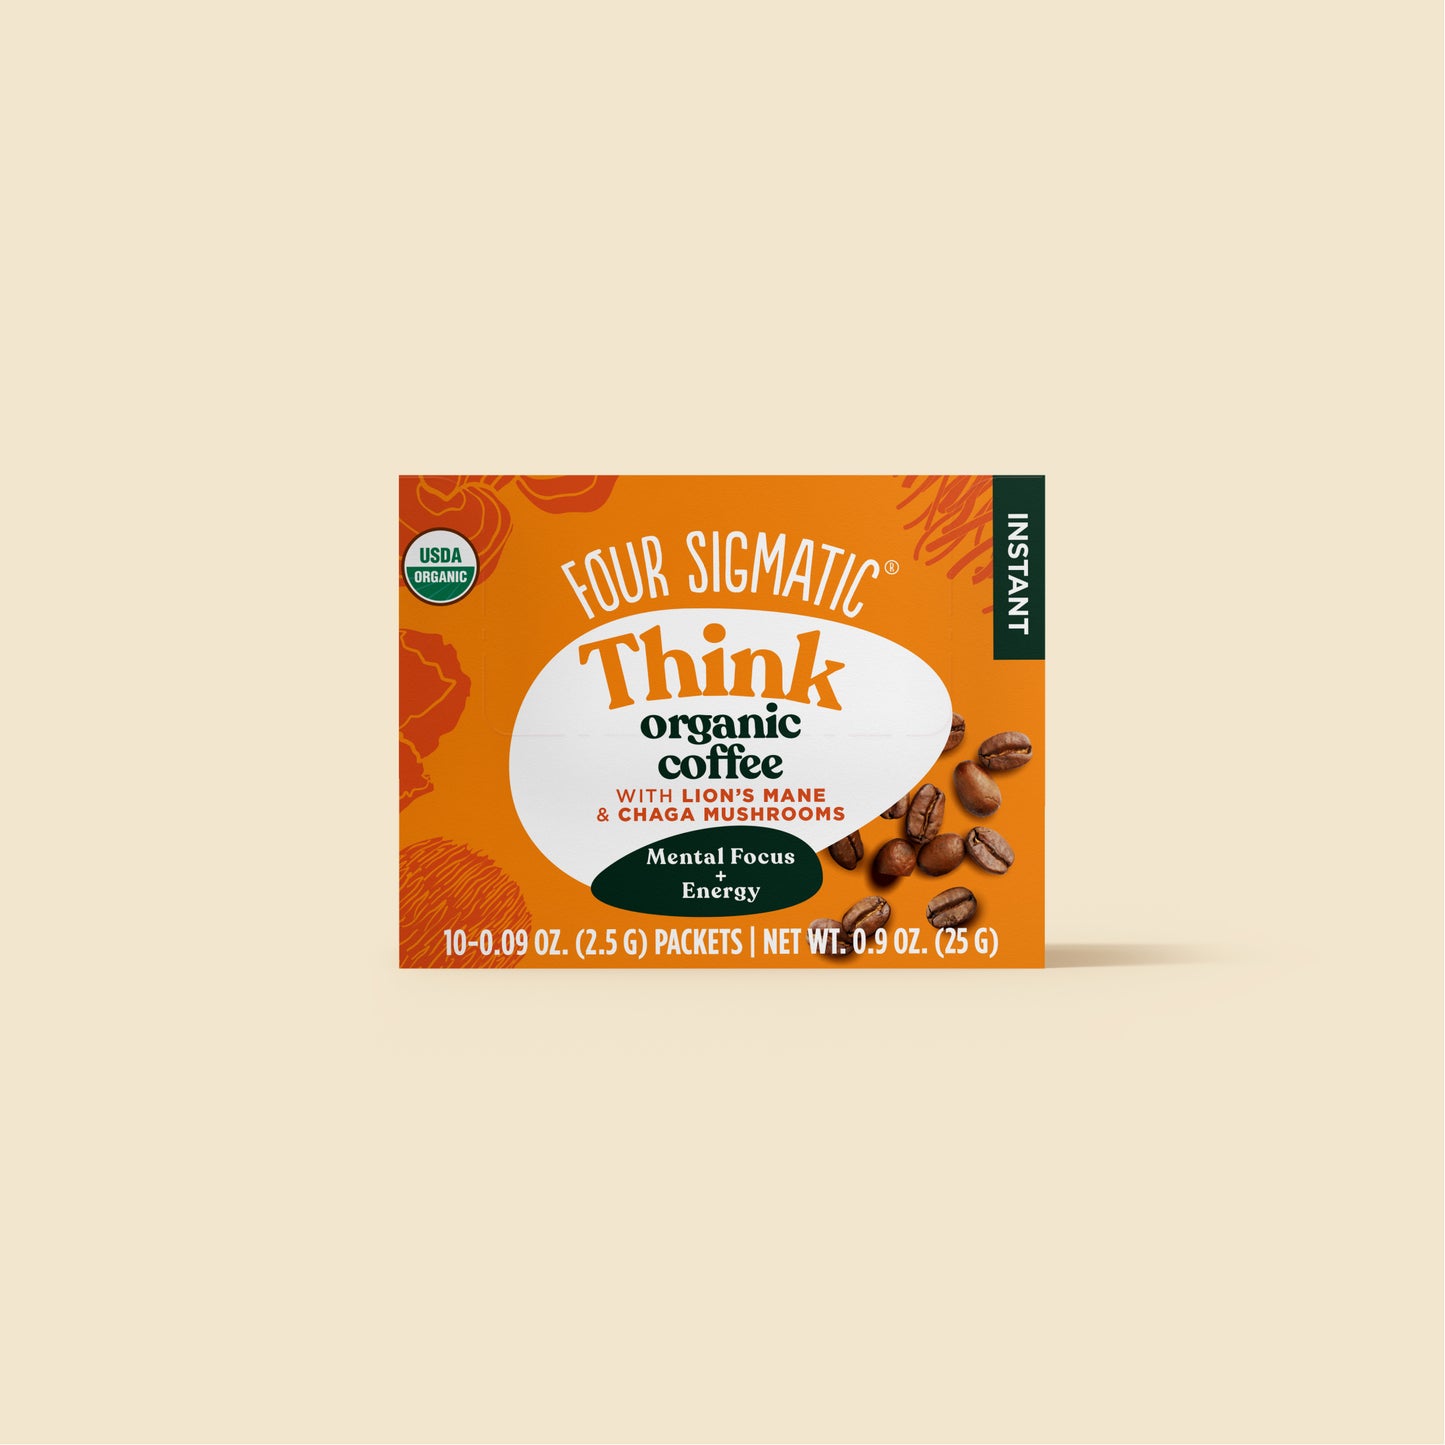 Think Instant Coffee Box 1-Pack